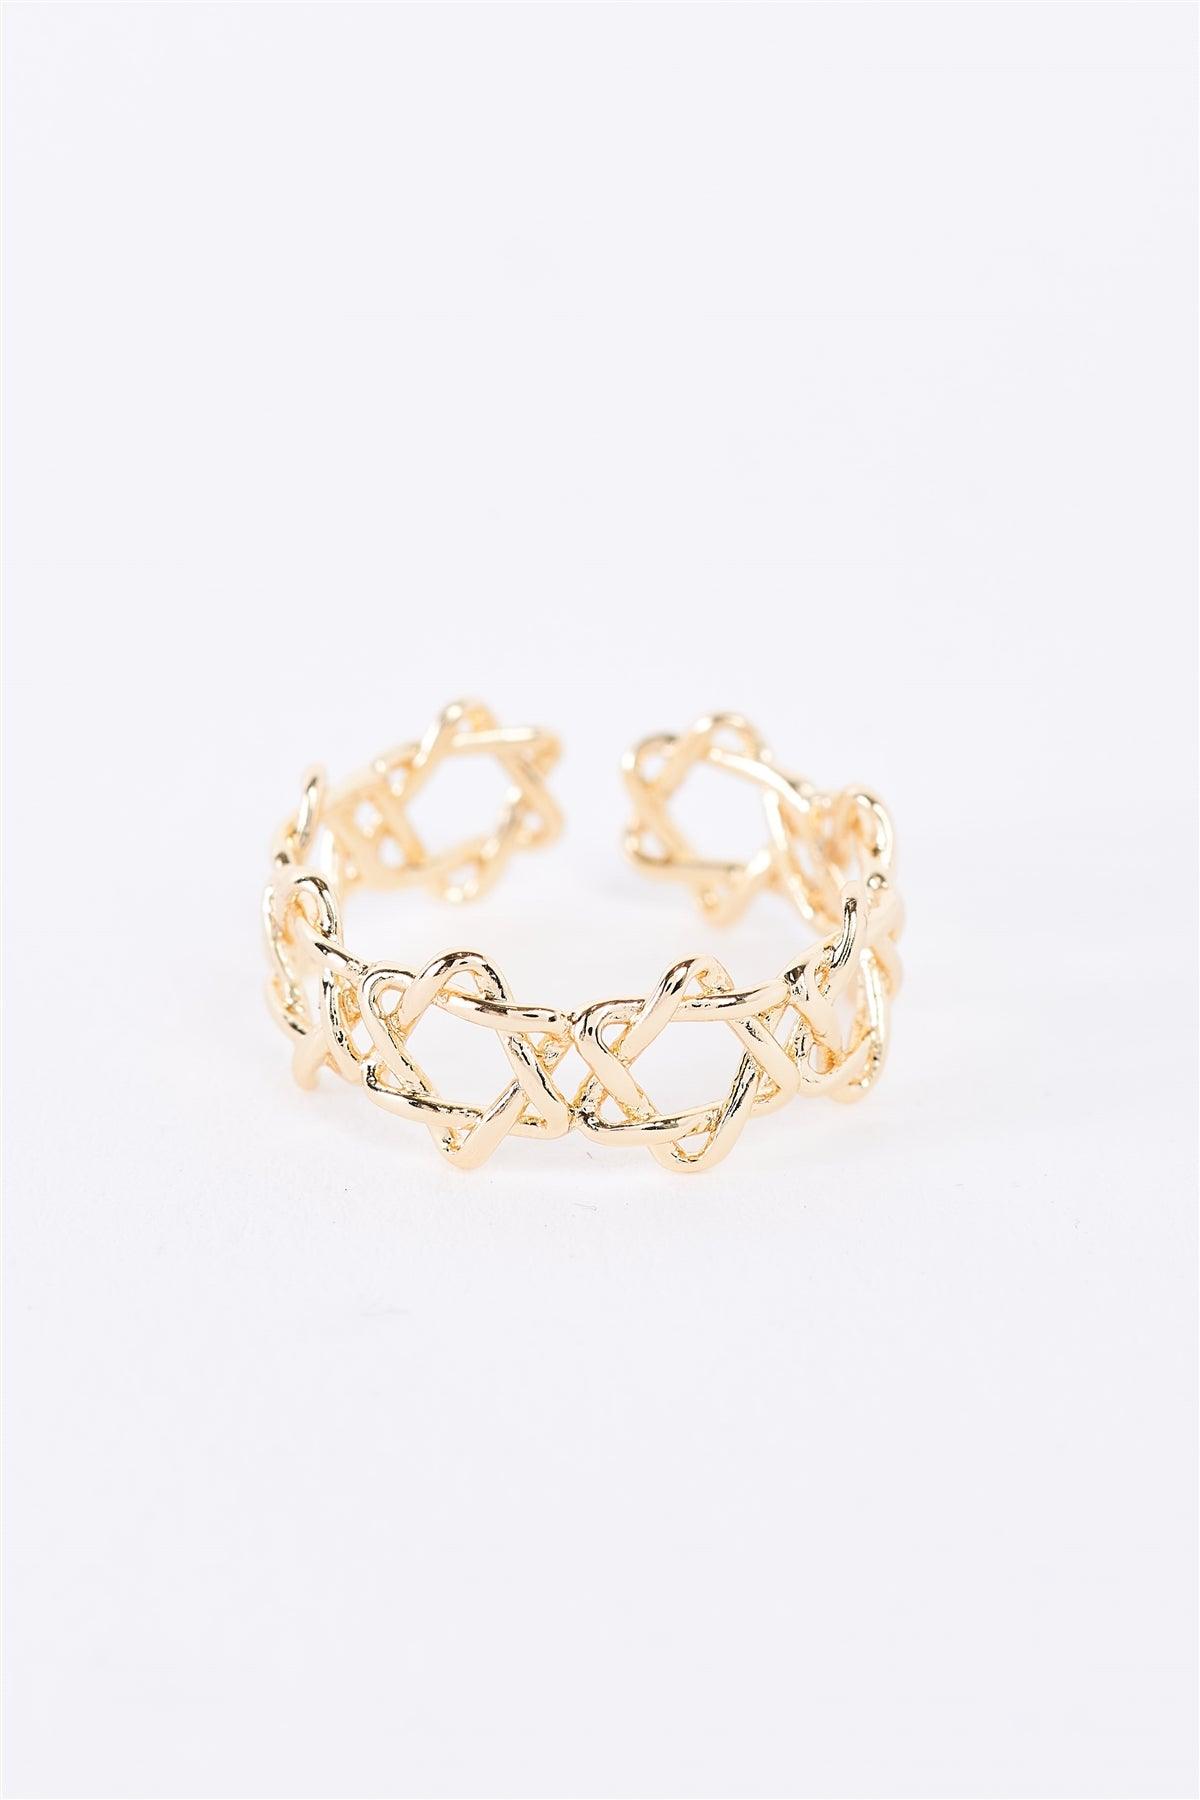 Gold David's Star Inspired Linked Ring /3 Pieces